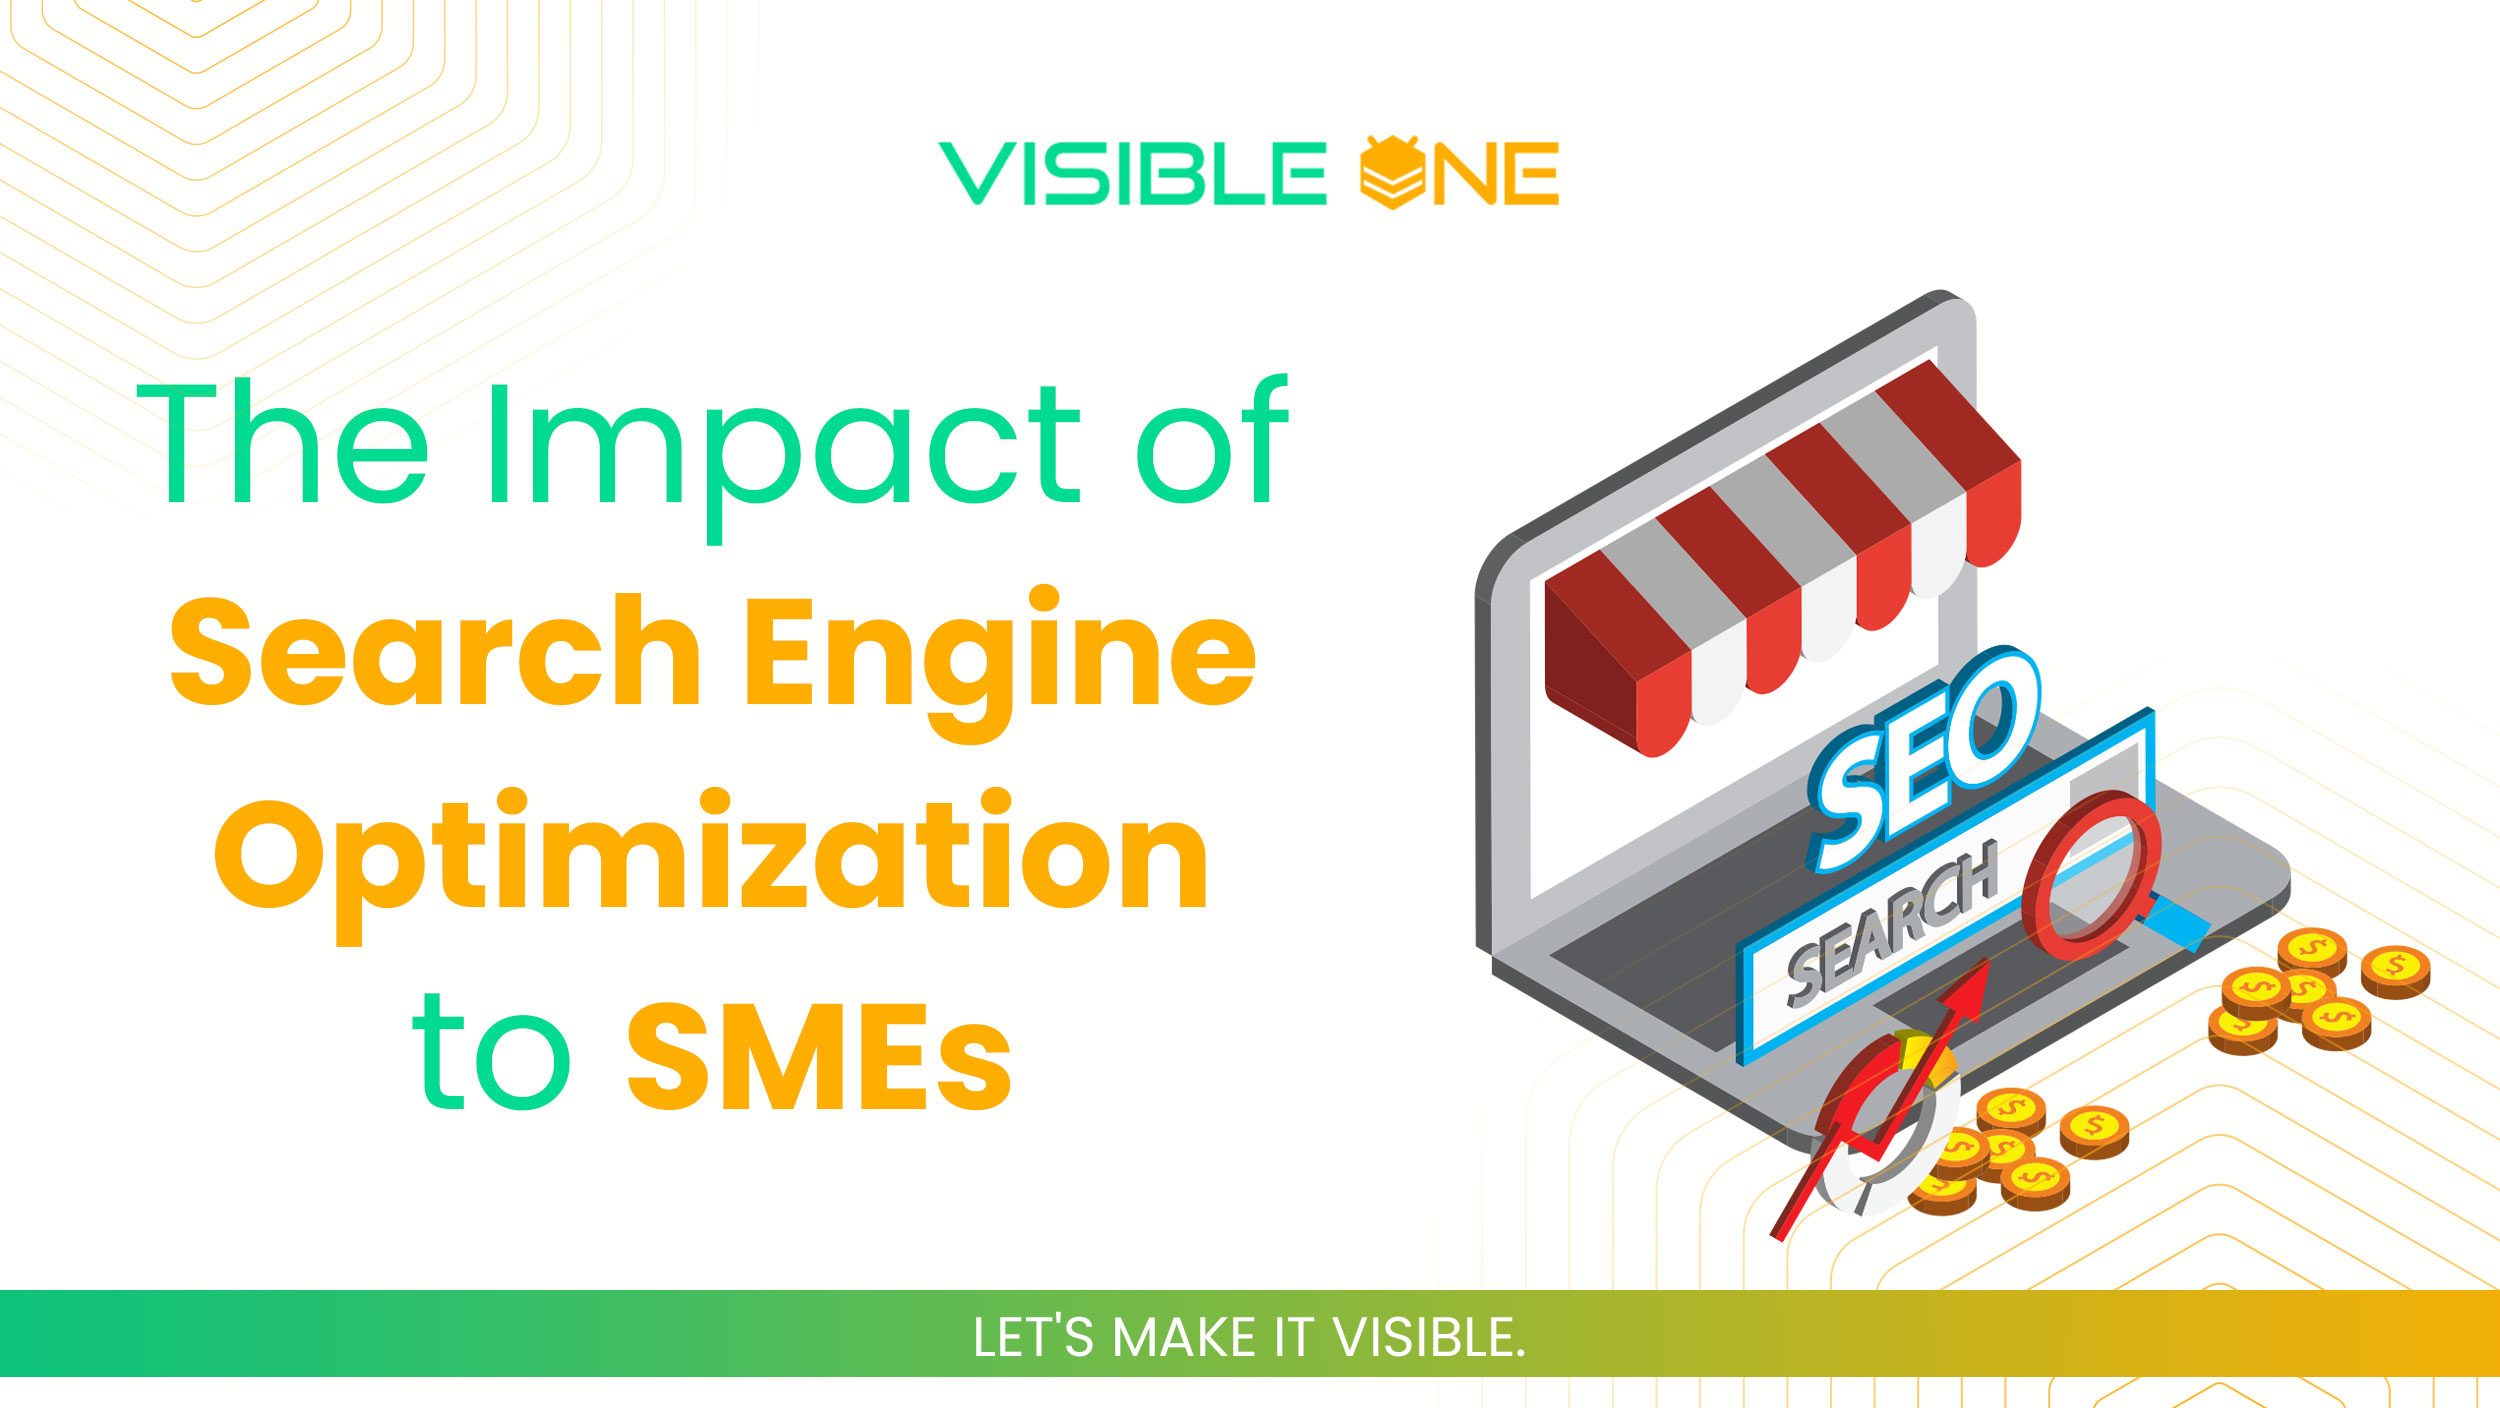 The Impact of Search Engine Optimization to SMEs